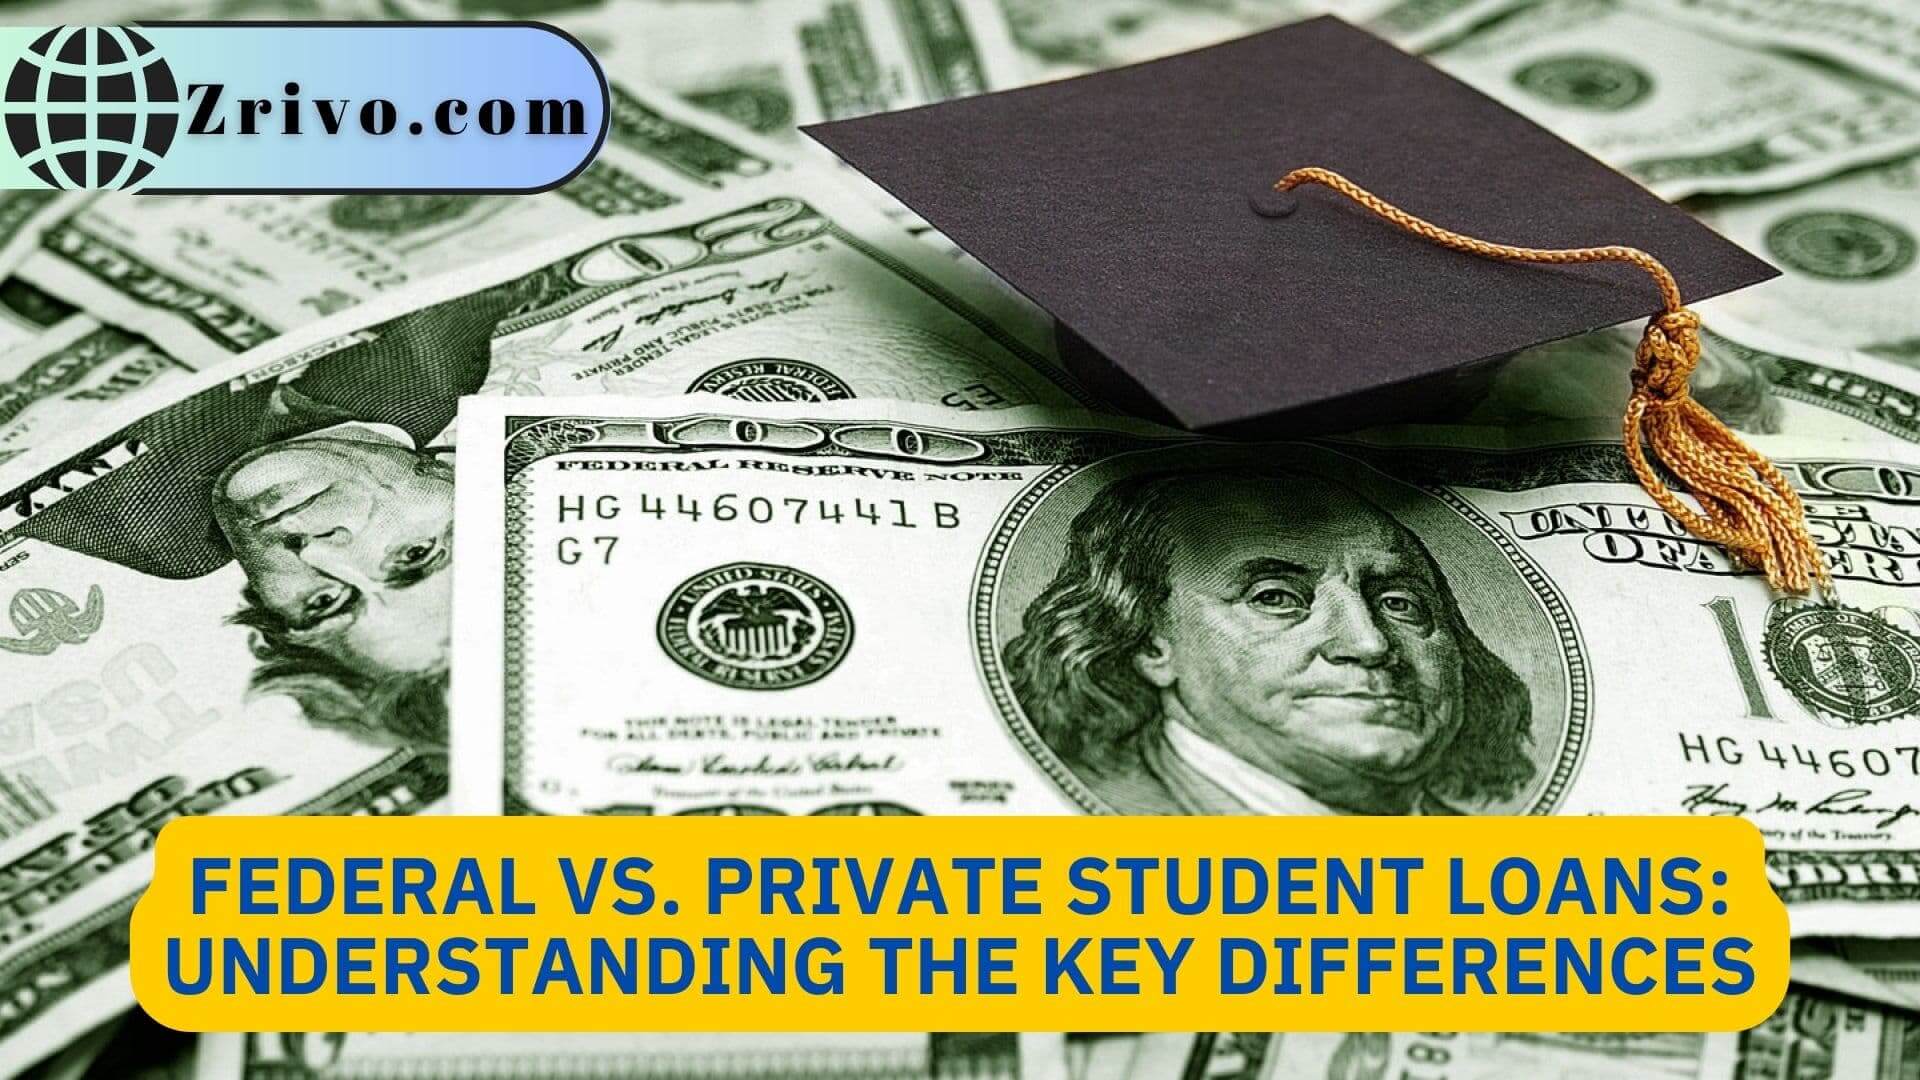 Federal vs. Private Student Loans: Understanding the Key Differences